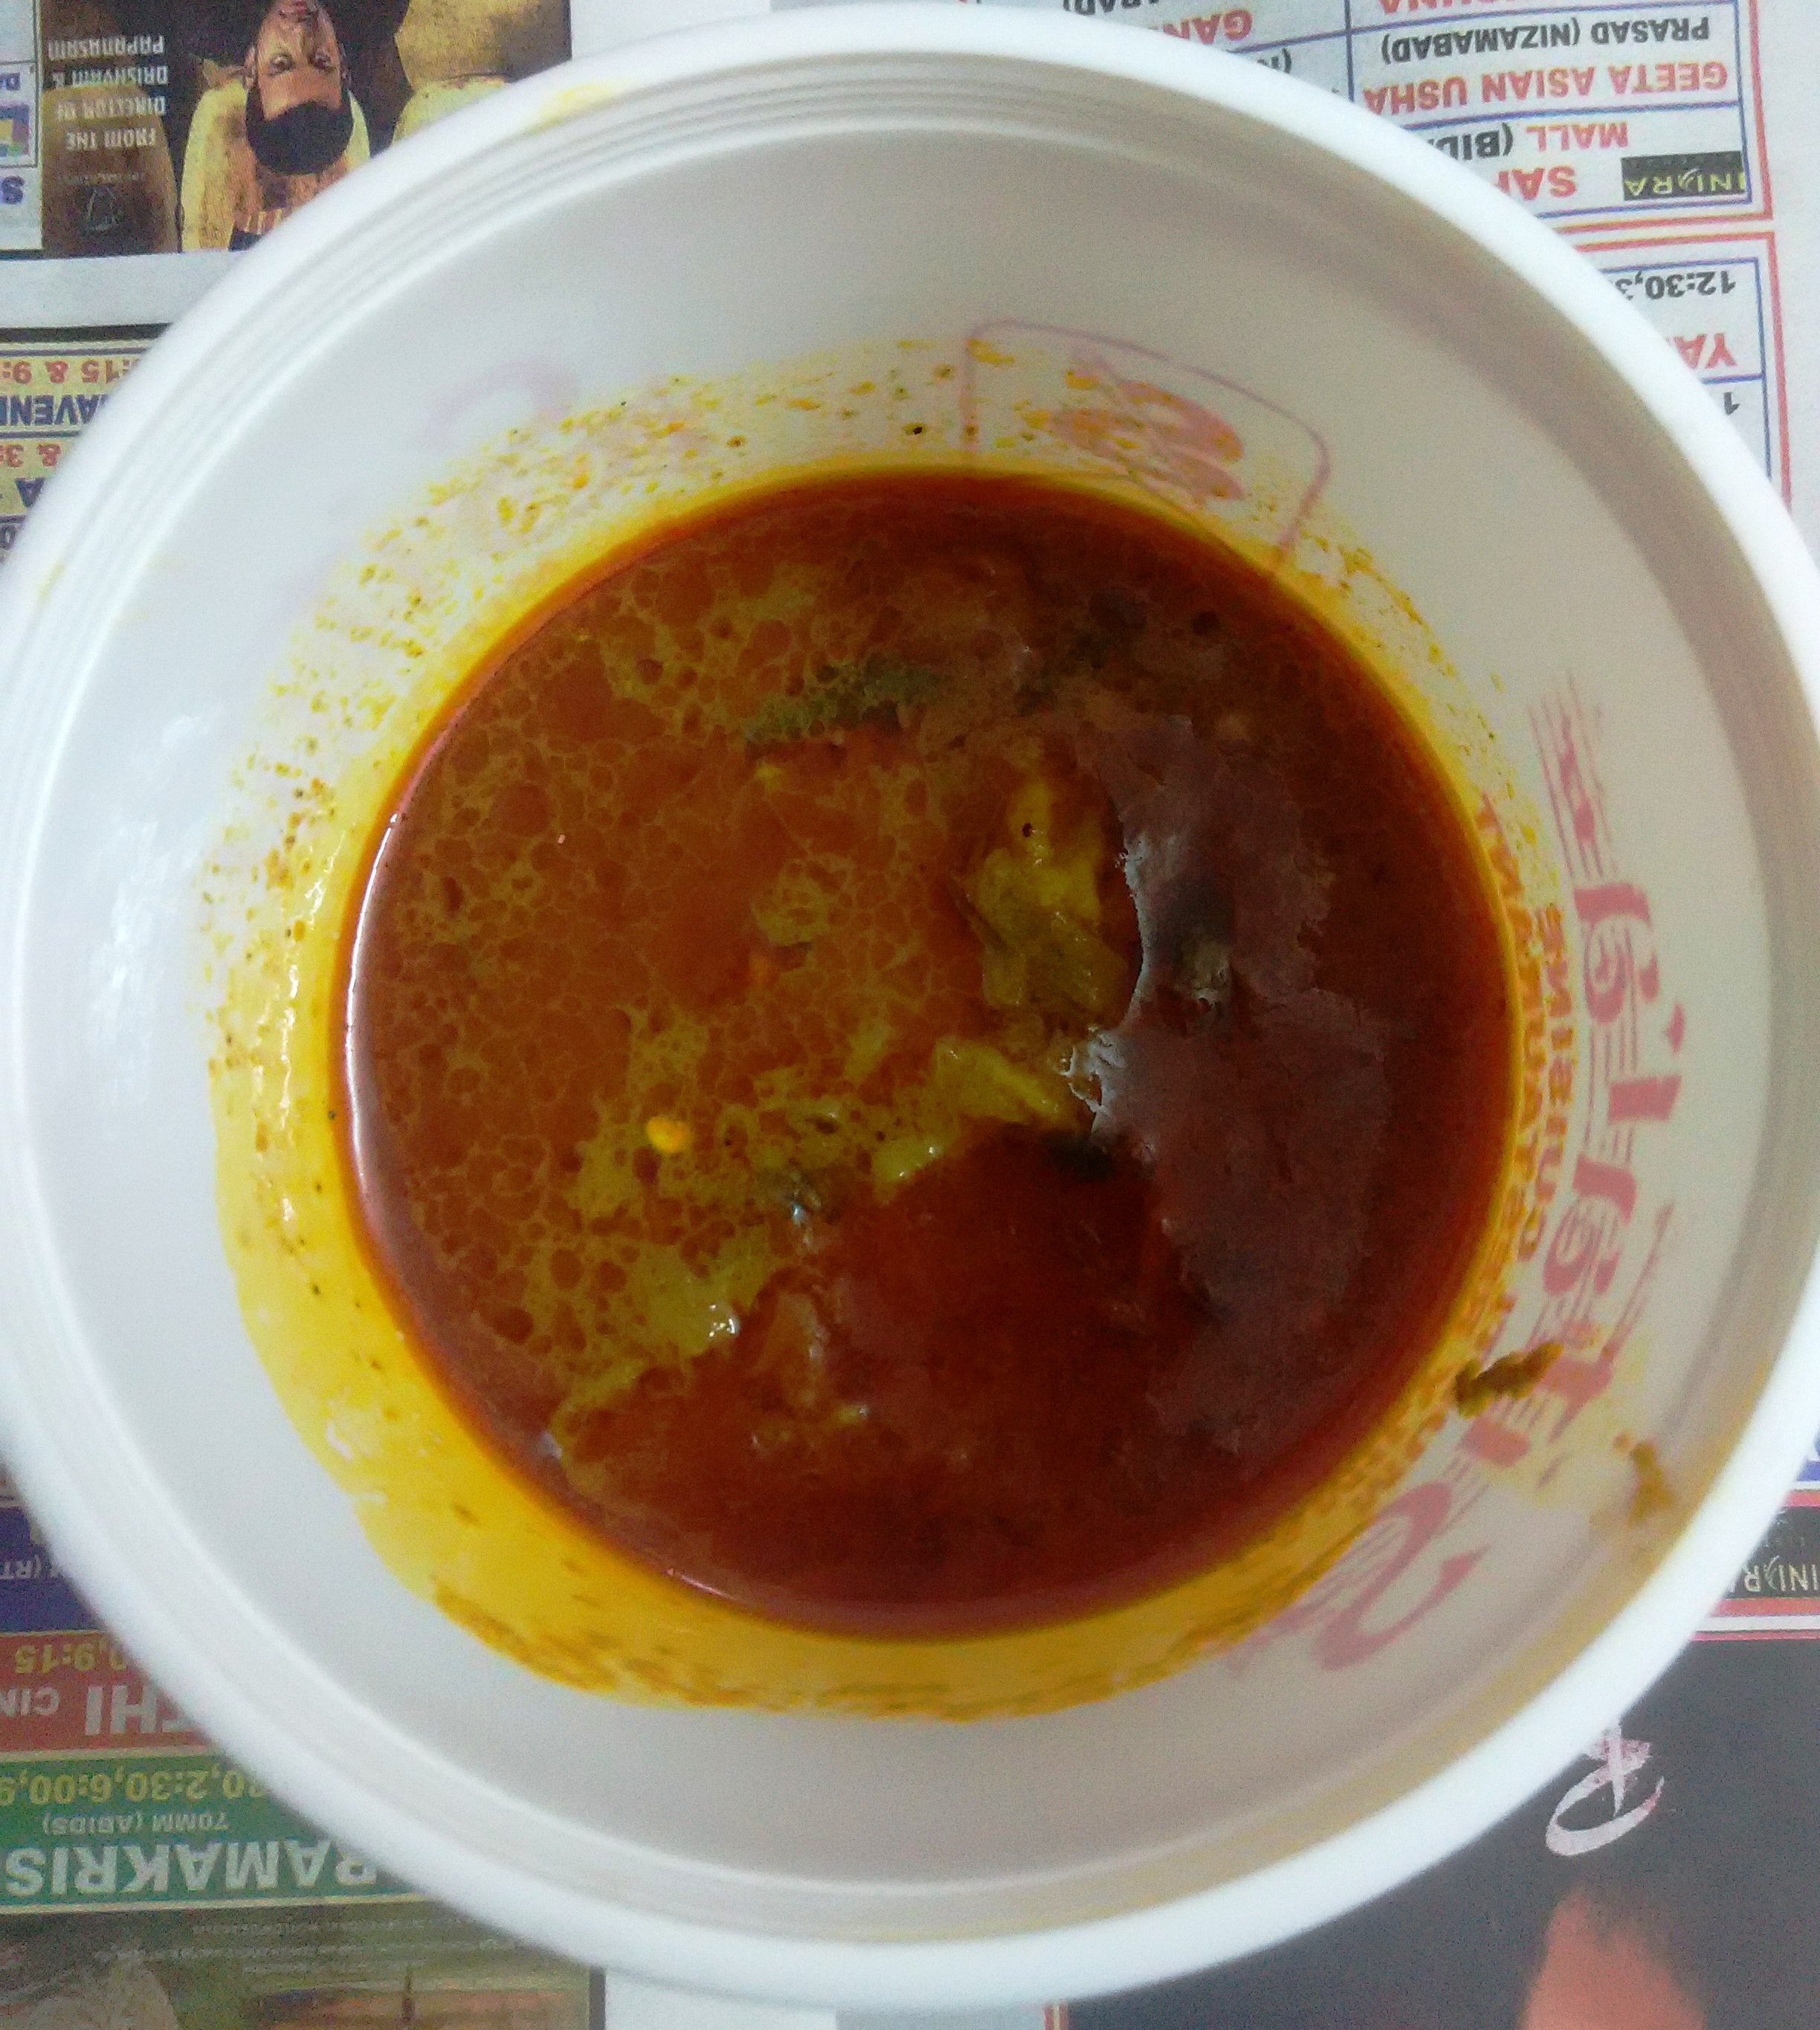 Andhra Fish Curry